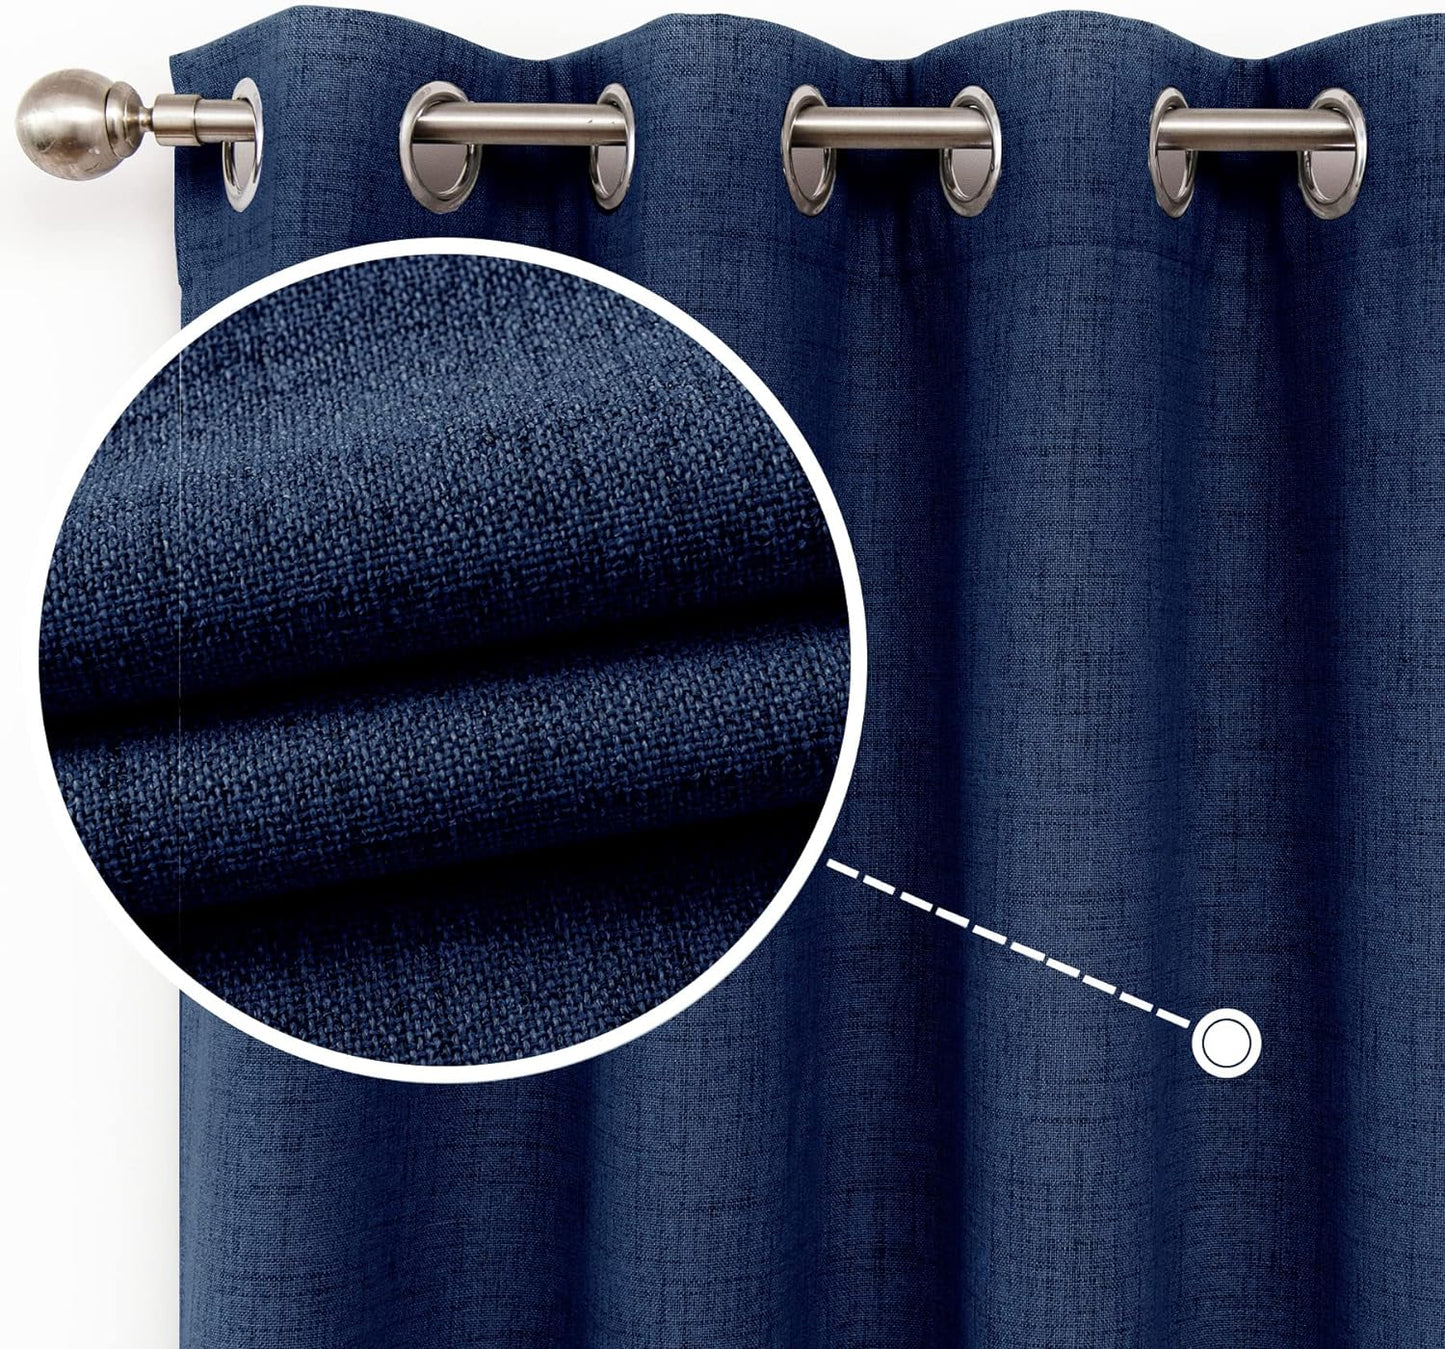 CUCRAF Full Blackout Window Curtains 84 Inches Long,Faux Linen Look Thermal Insulated Grommet Drapes Panels for Bedroom Living Room,Set of 2(52 X 84 Inches, Light Khaki)  CUCRAF Navy Blue 52 X 84 Inches 